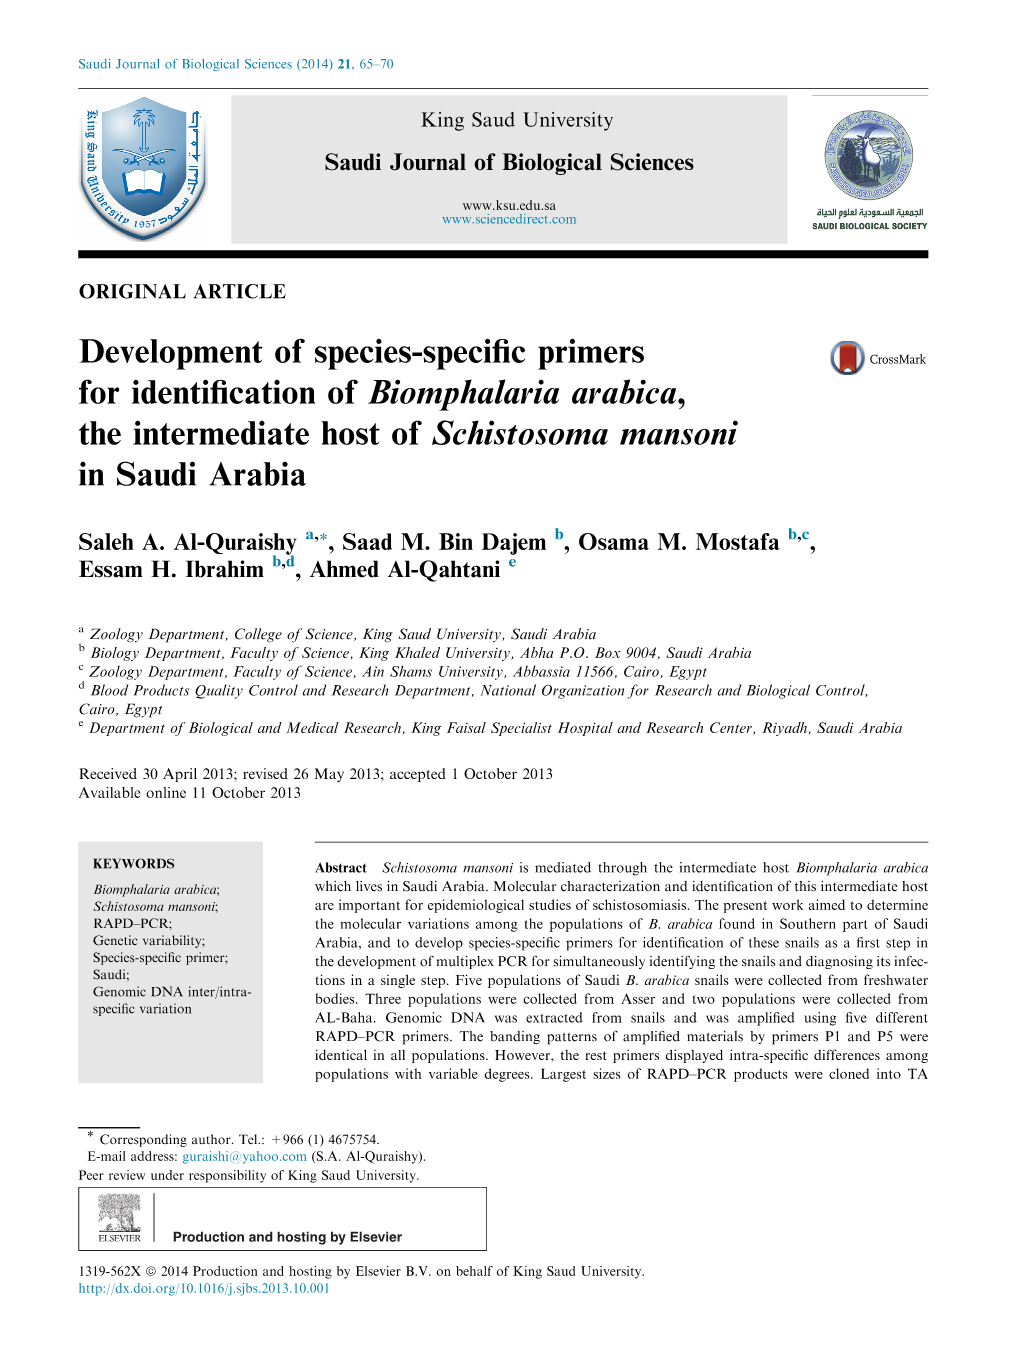 Development of Species-Specific Primers for Identification Of